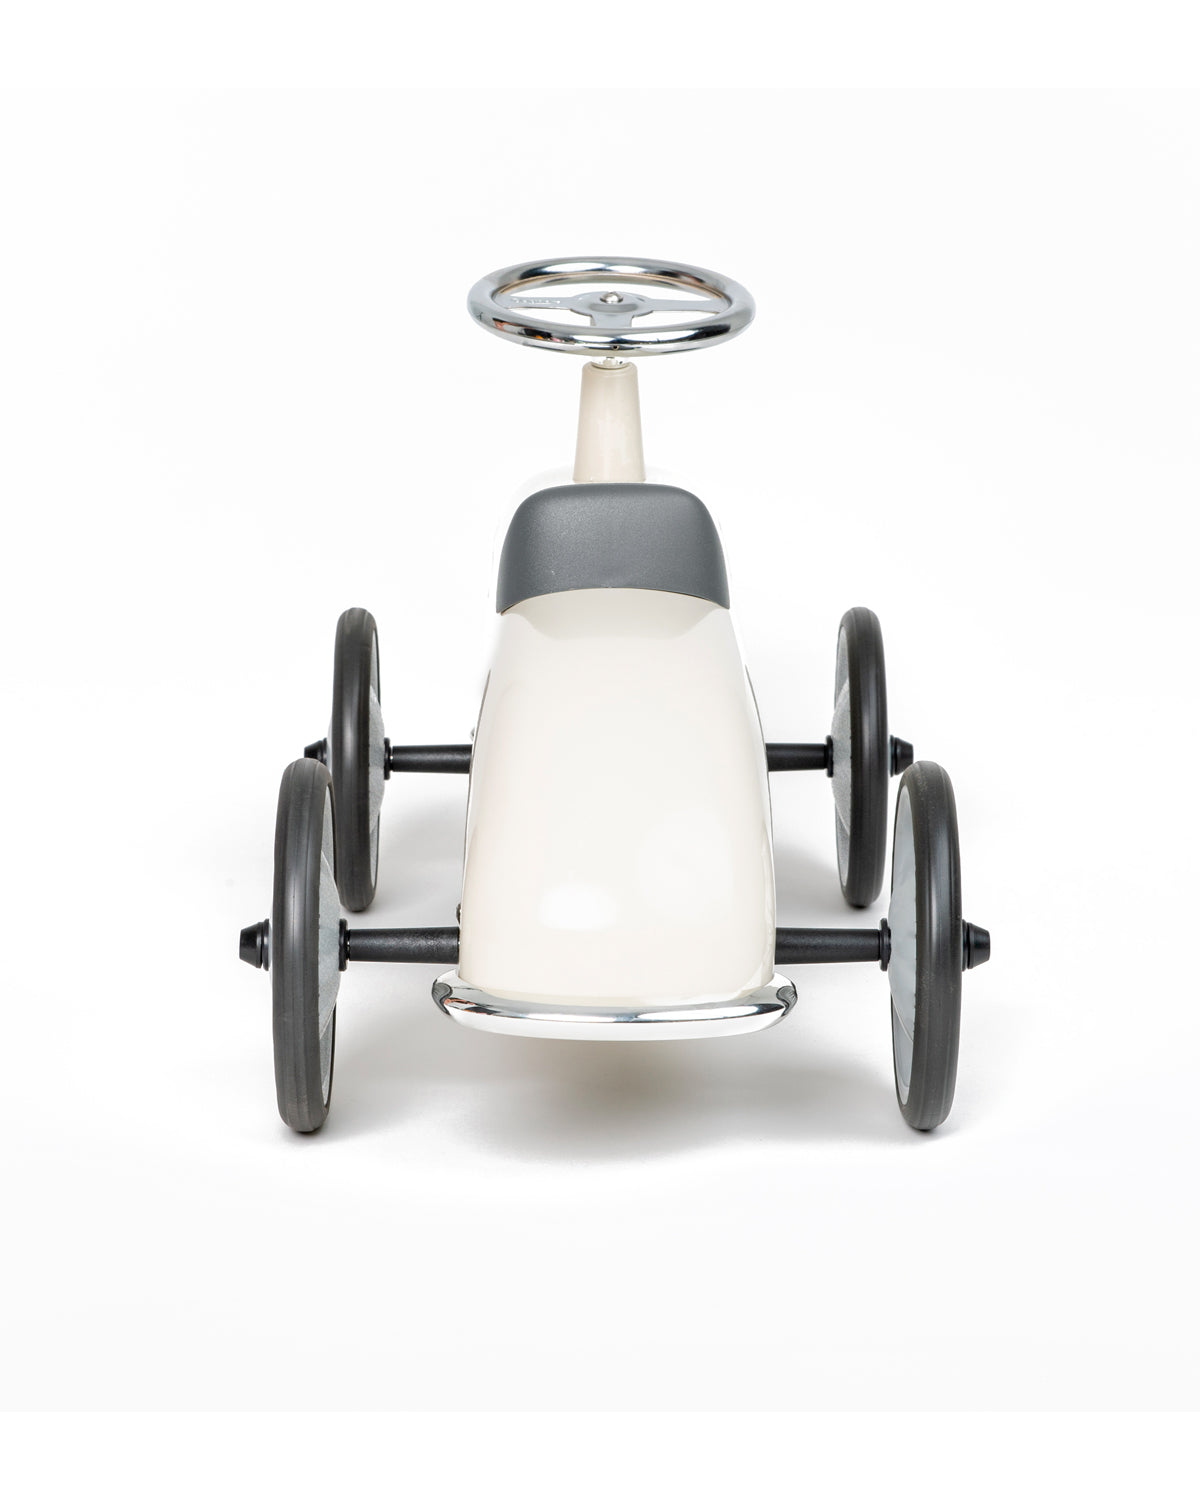 Ride-On ROADSTER Ivory White